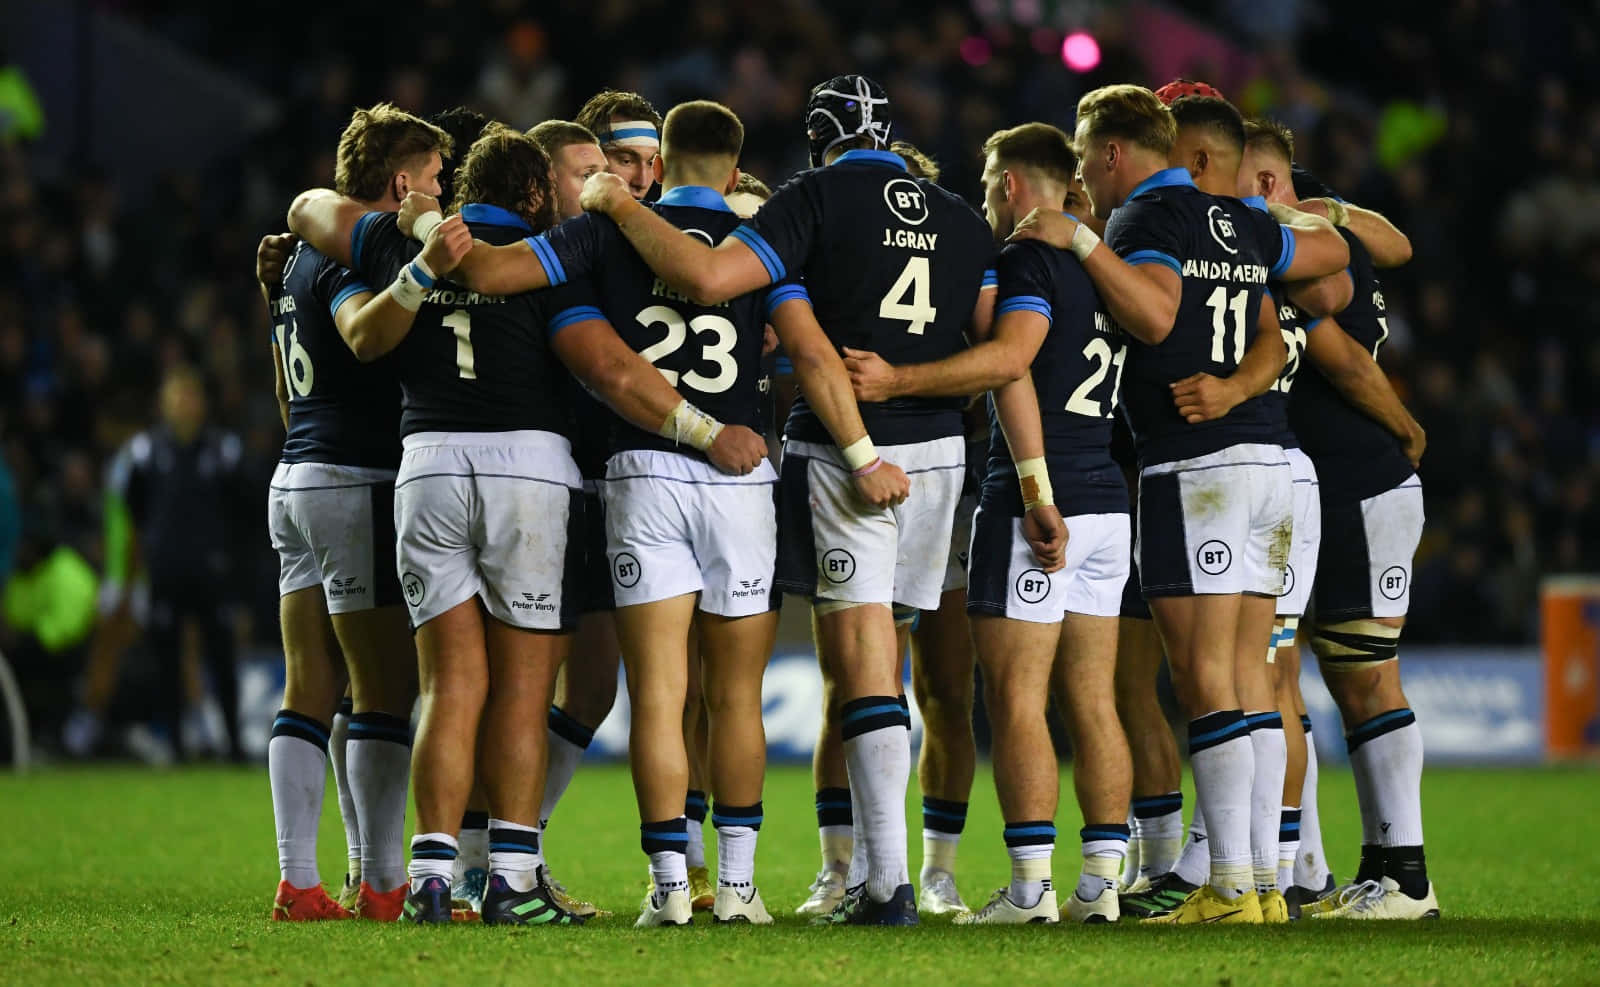 Thrilling Victory for Scotland Rugby Team Wallpaper